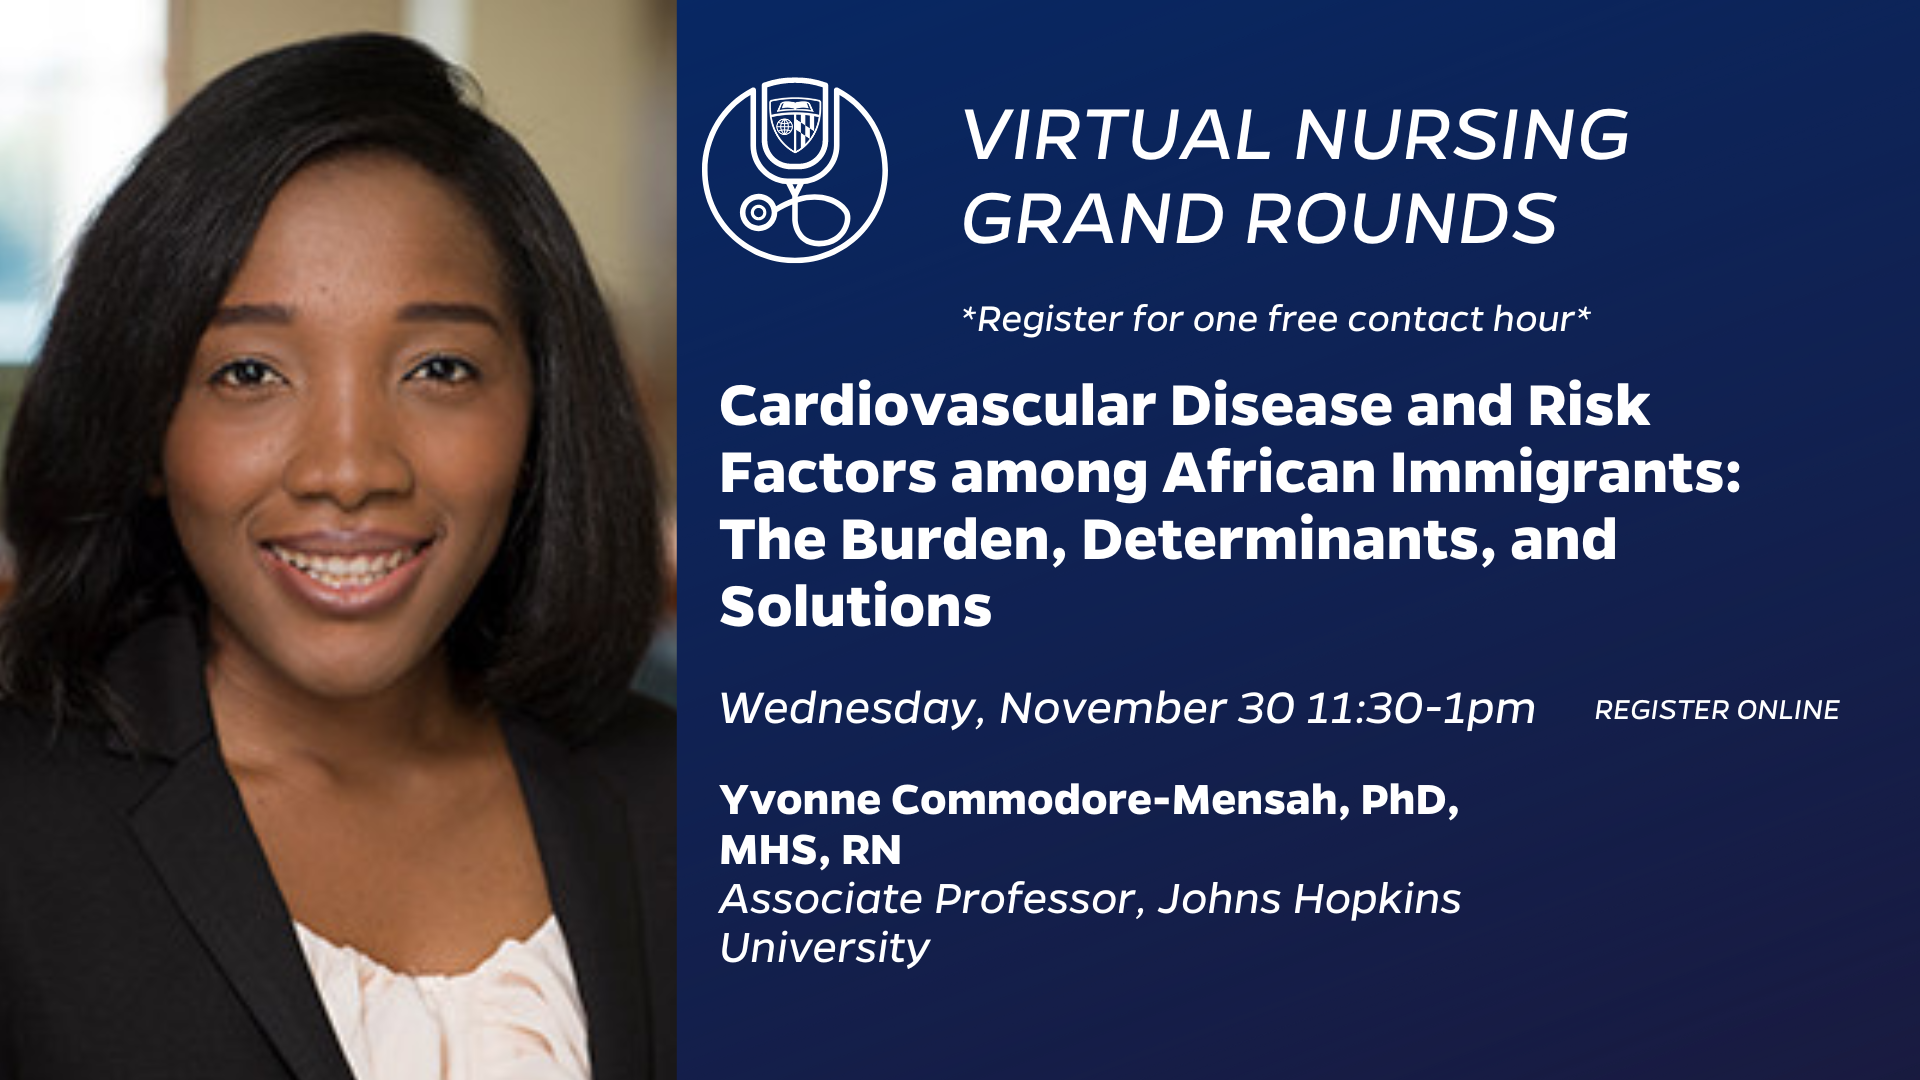 Virtual Nursing Grand Rounds: Cardiovascular Disease and Risk Factors among African Immigrants: The Burden, Determinants, and Solutions